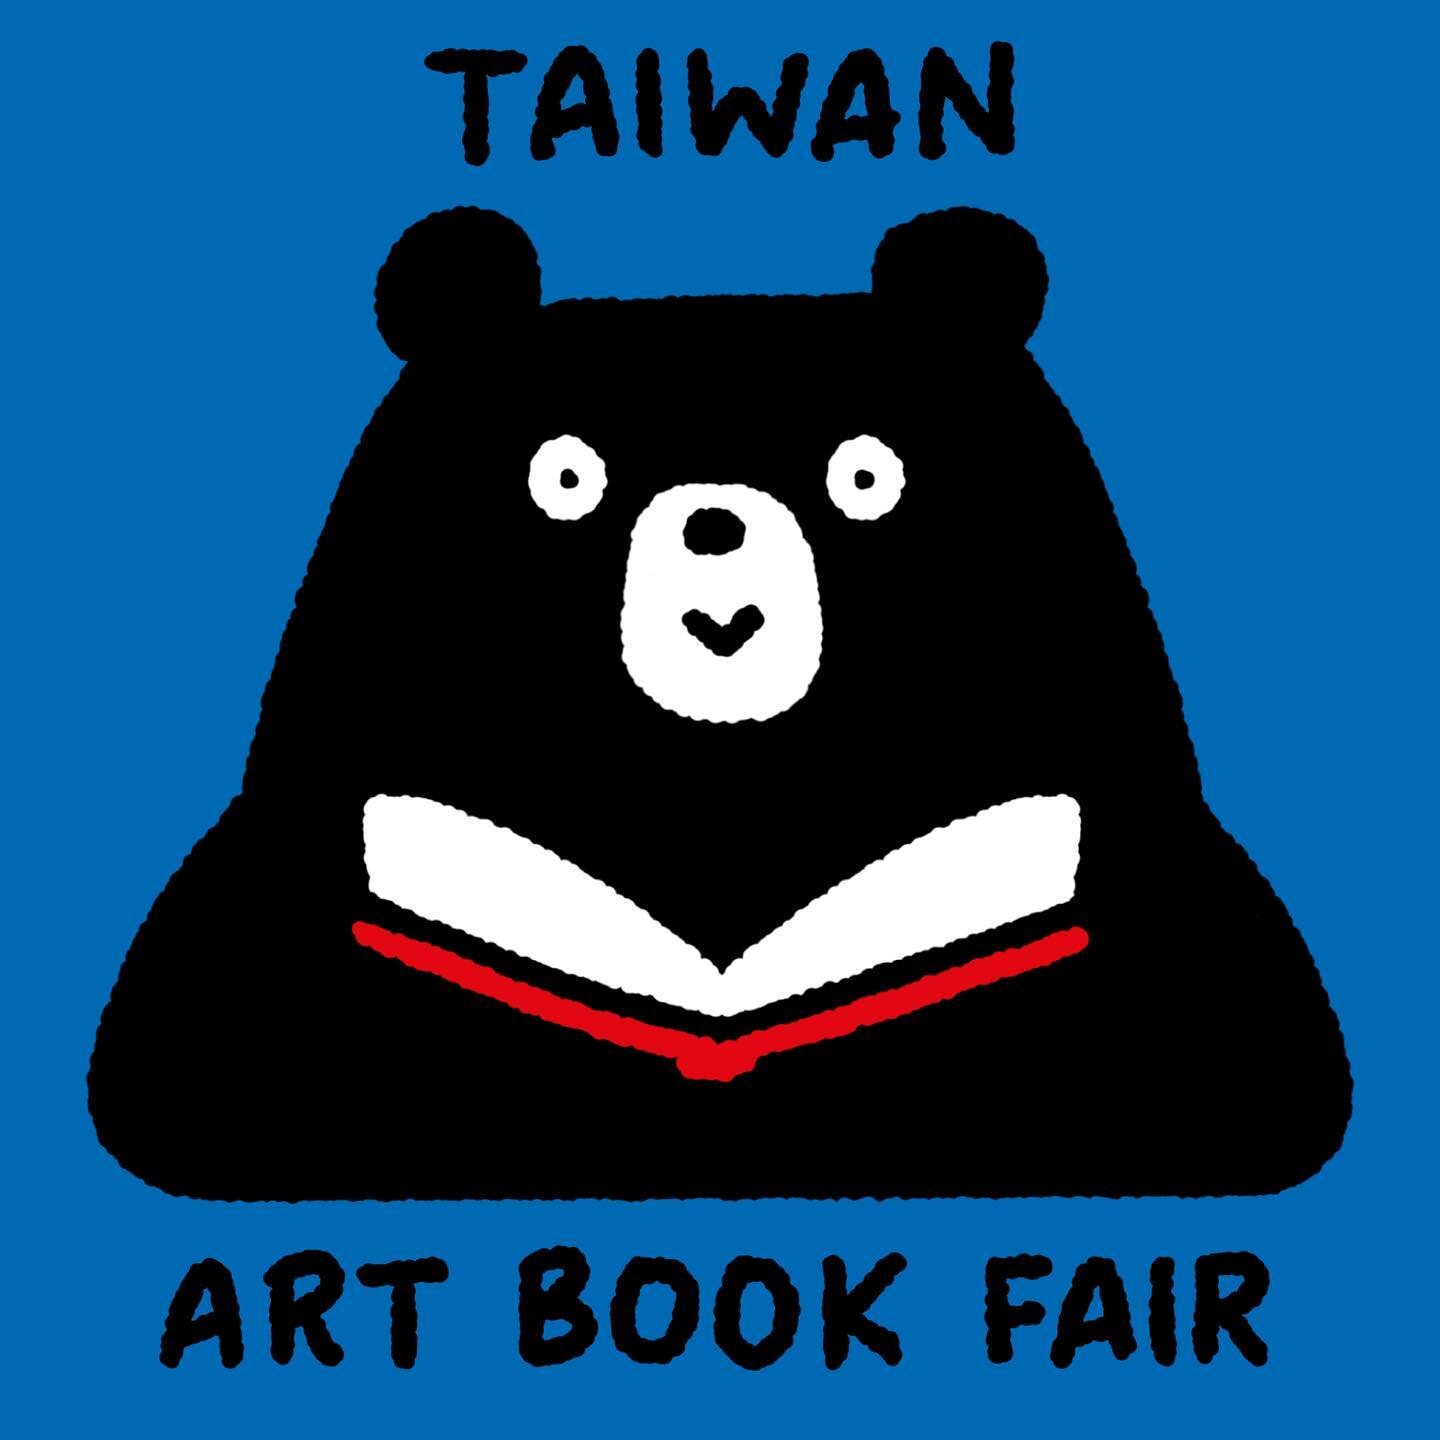 Hello all! 

Hello 大家！

Exciting news! 
We are back in Taipei for the Art Book Fair starting tomorrow! 

我們又來到台北囉！我們明天開始會在草率季喔！

Date: 11/3~11/5 from 13:00~21:00!

地點：華山1914文化創意產業園區

Location: Huashan Park 1914 park 

Booth: C81

來找我們玩～
Please come v